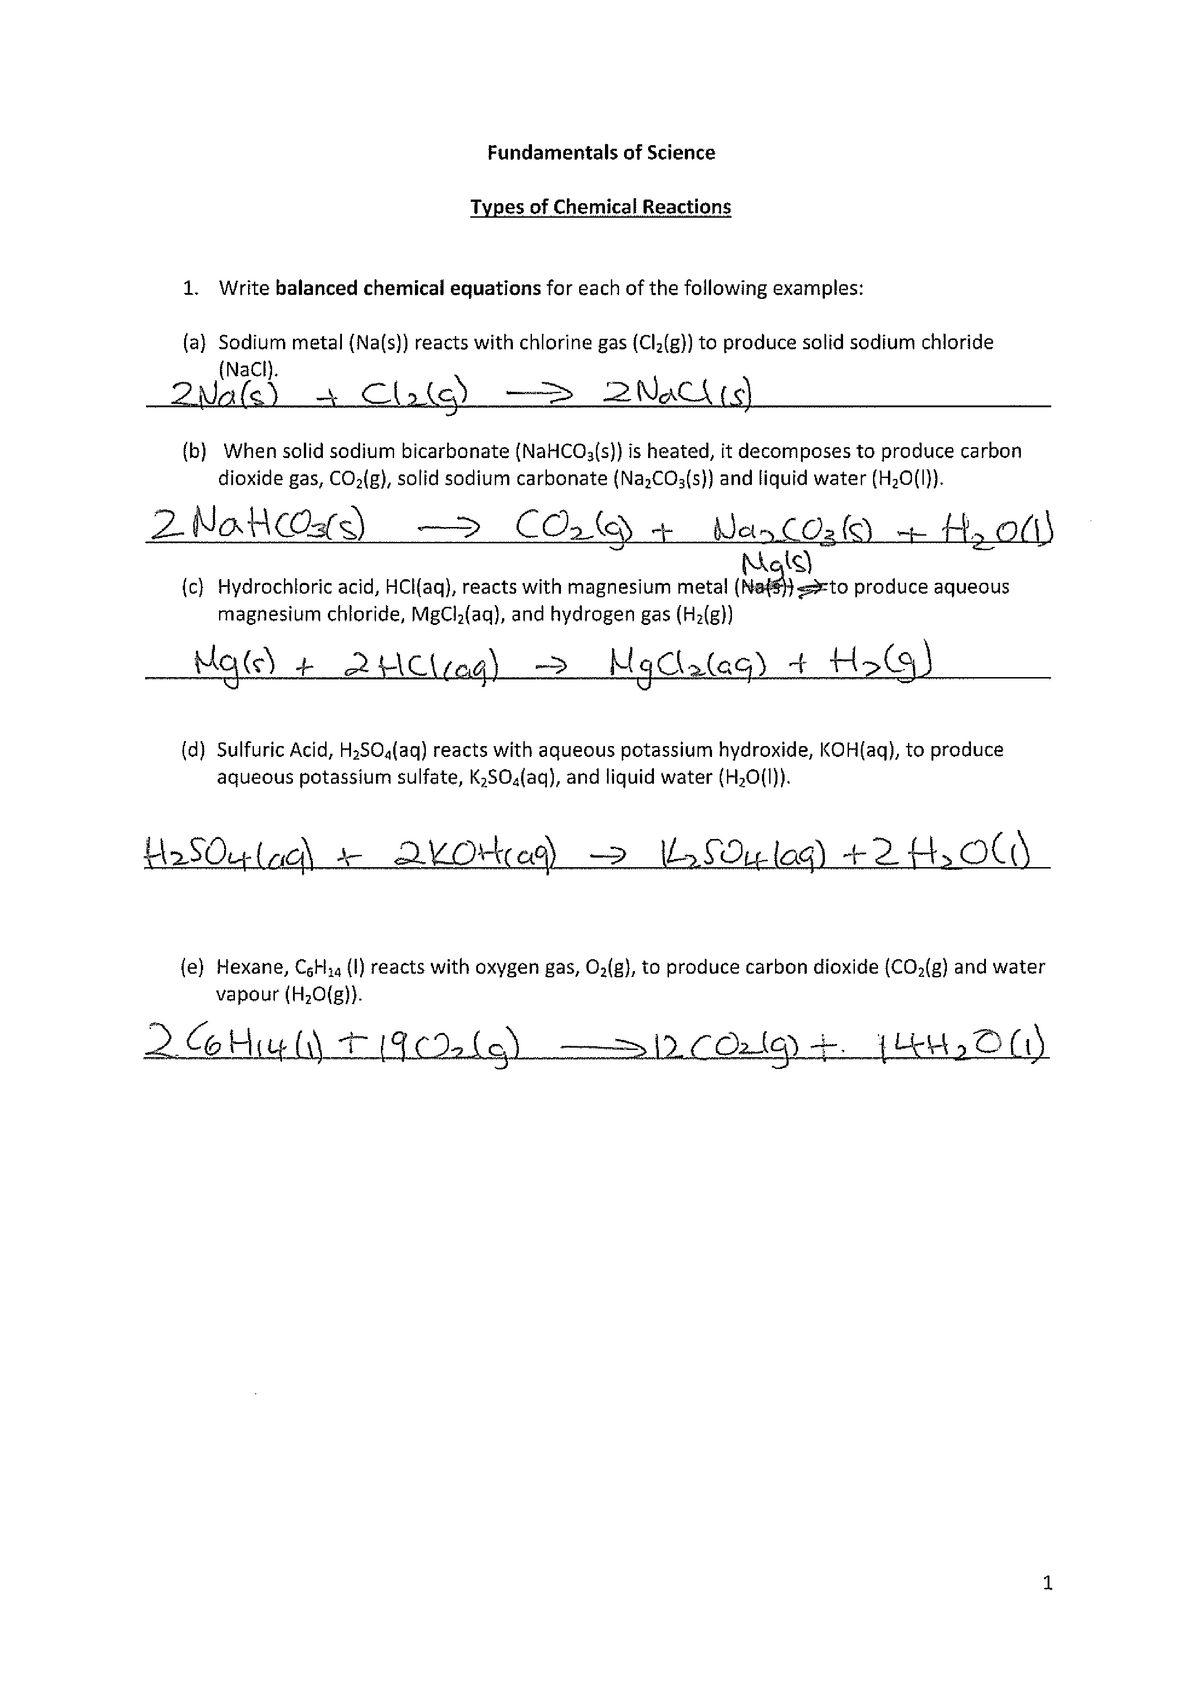 research questions on chemical reactions